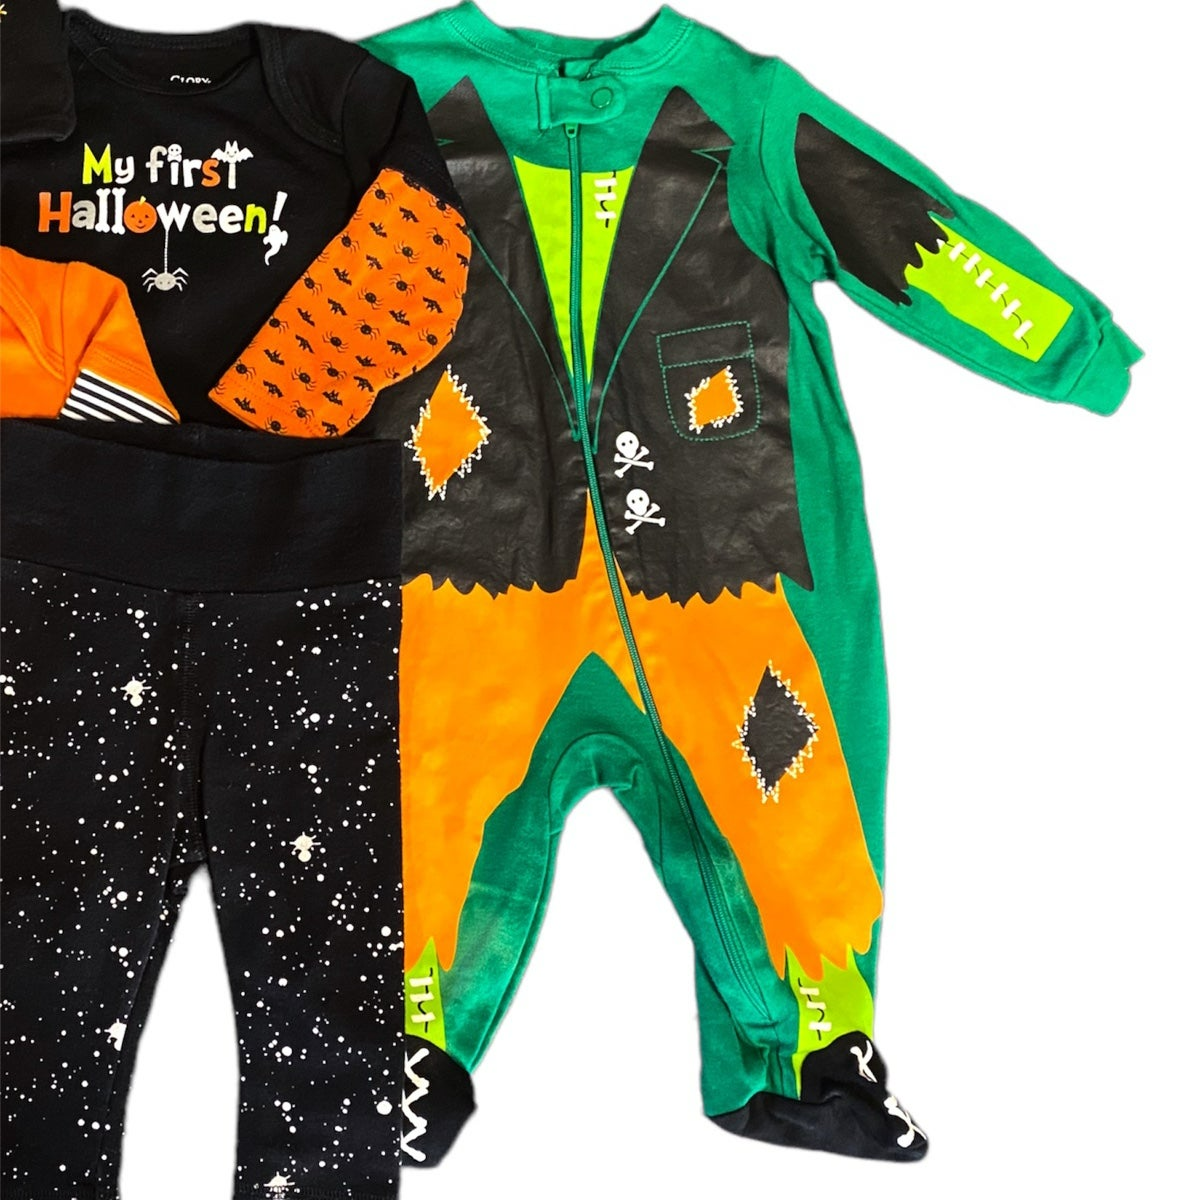 3-6 months Halloween bundle with costume